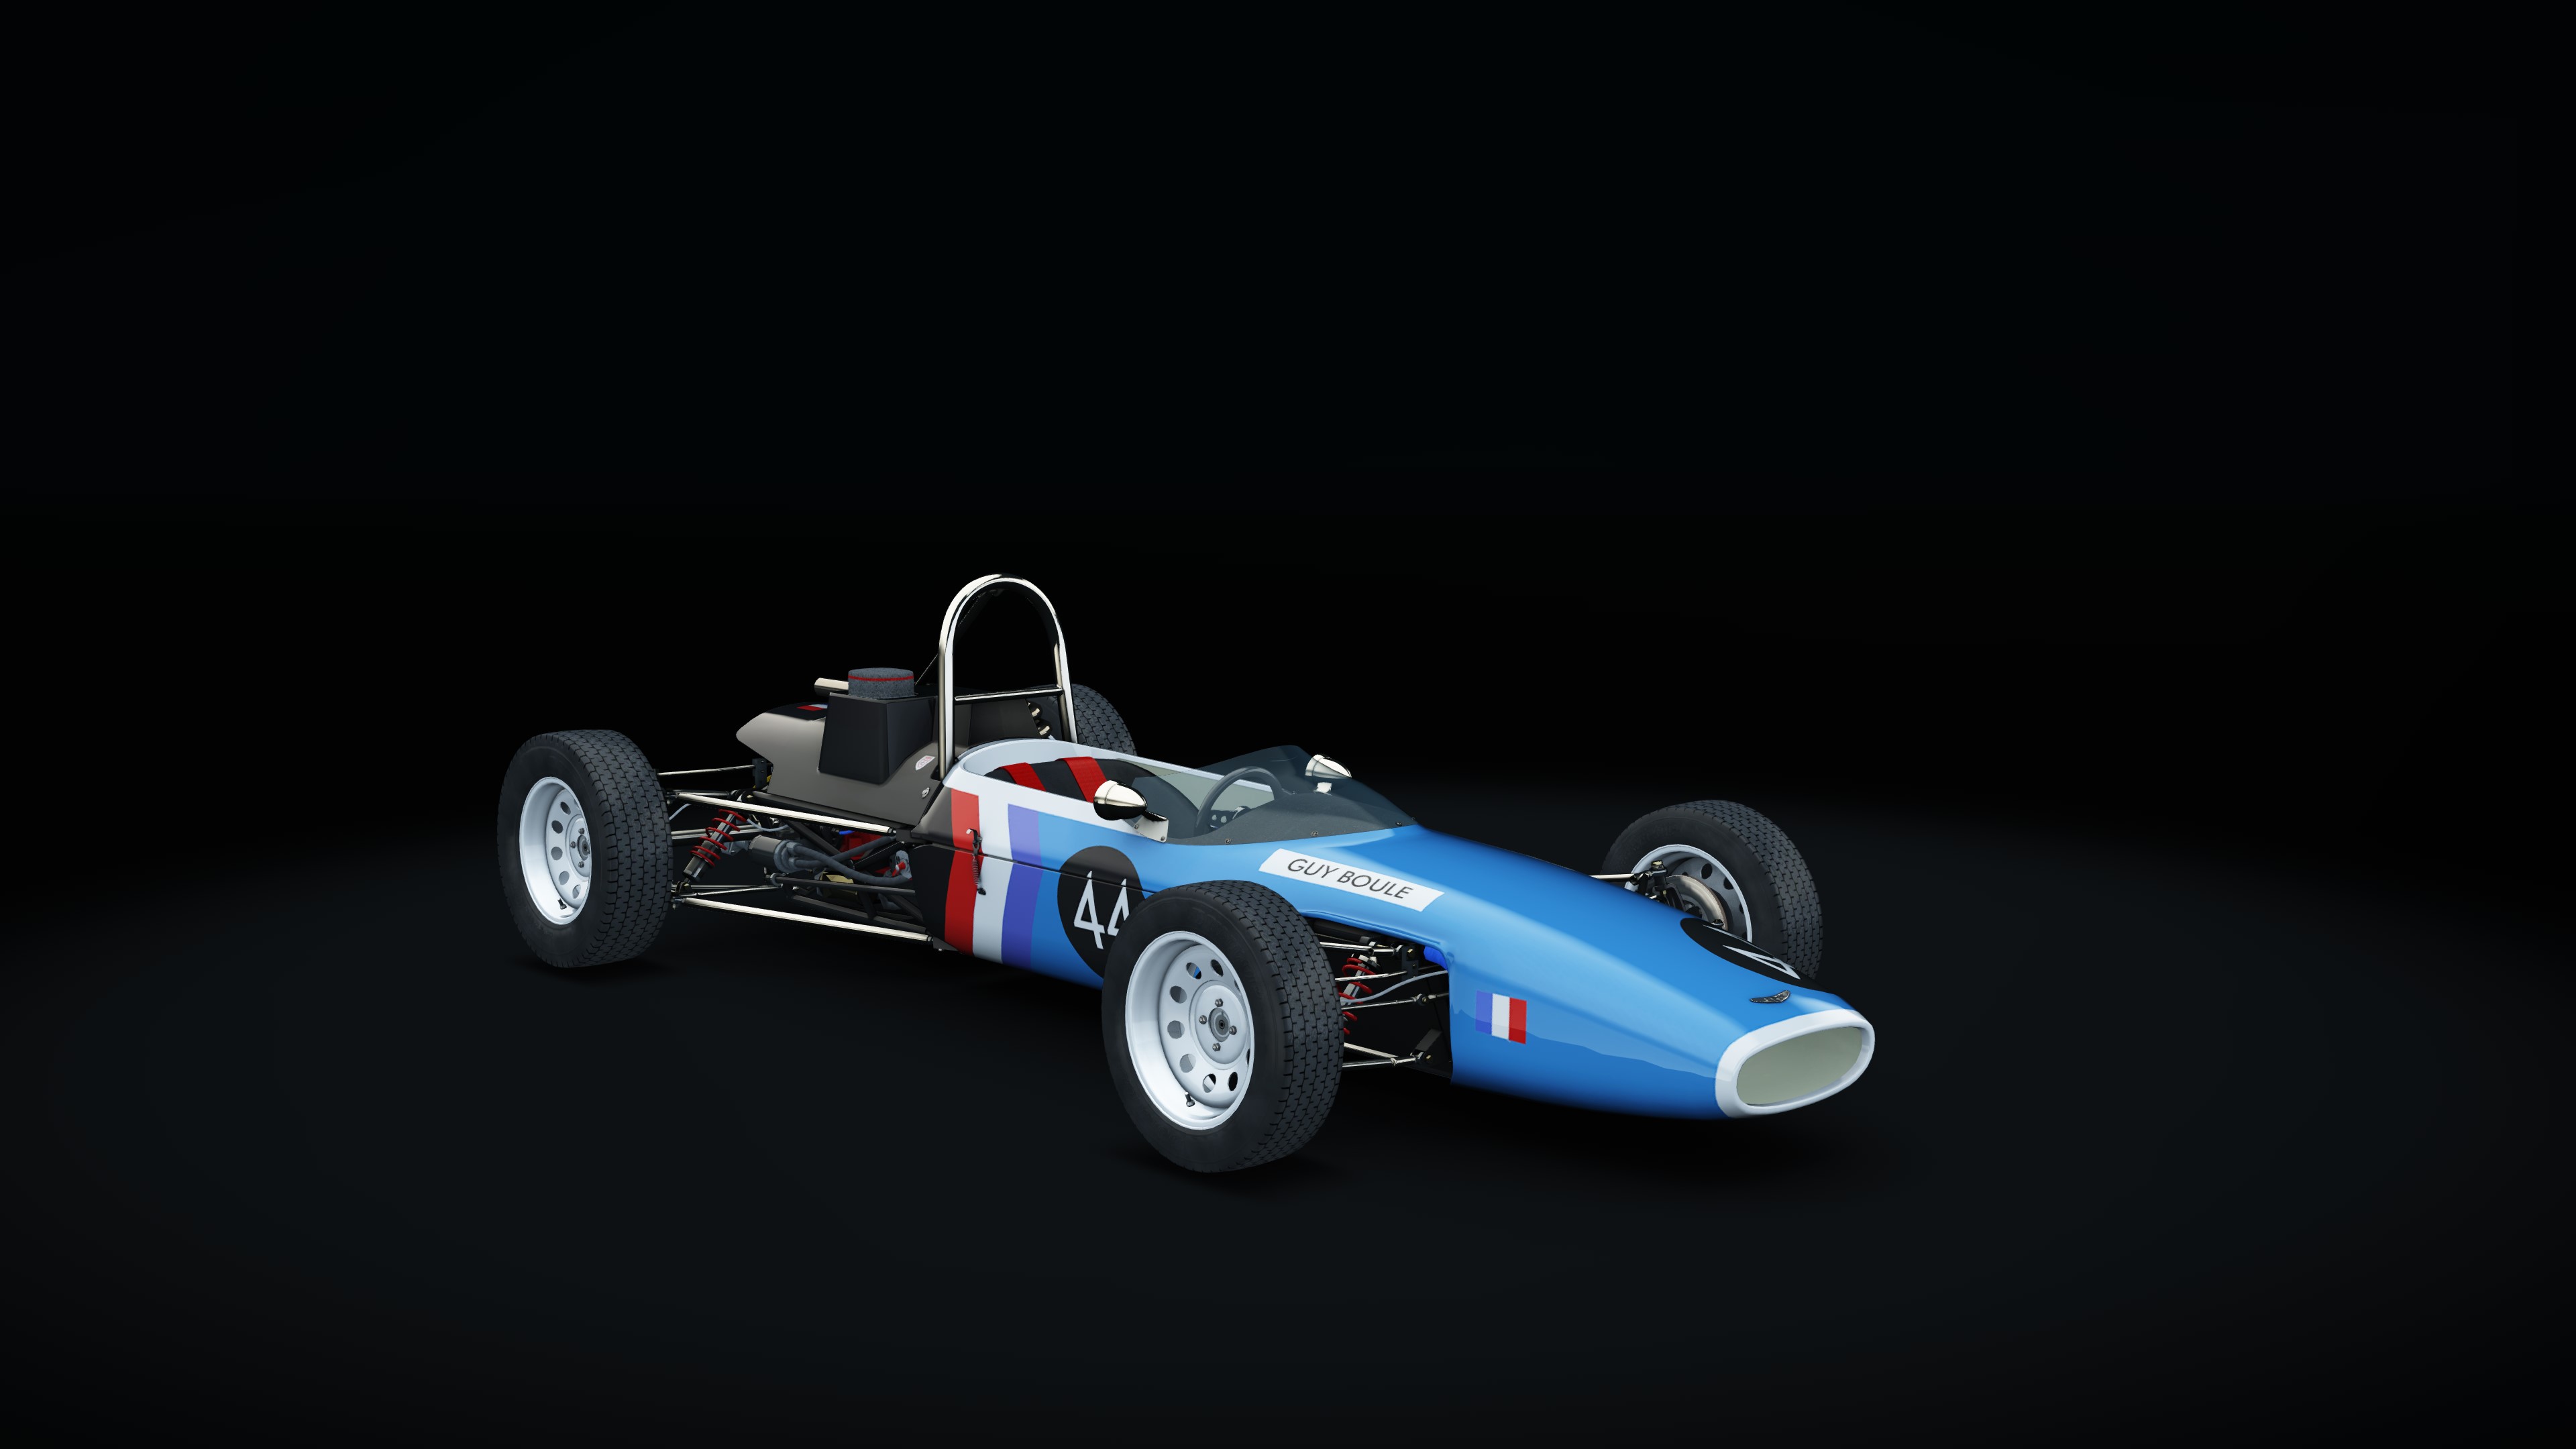 Russell-Alexis Mk. 14 Formula Ford, skin 44GBoule